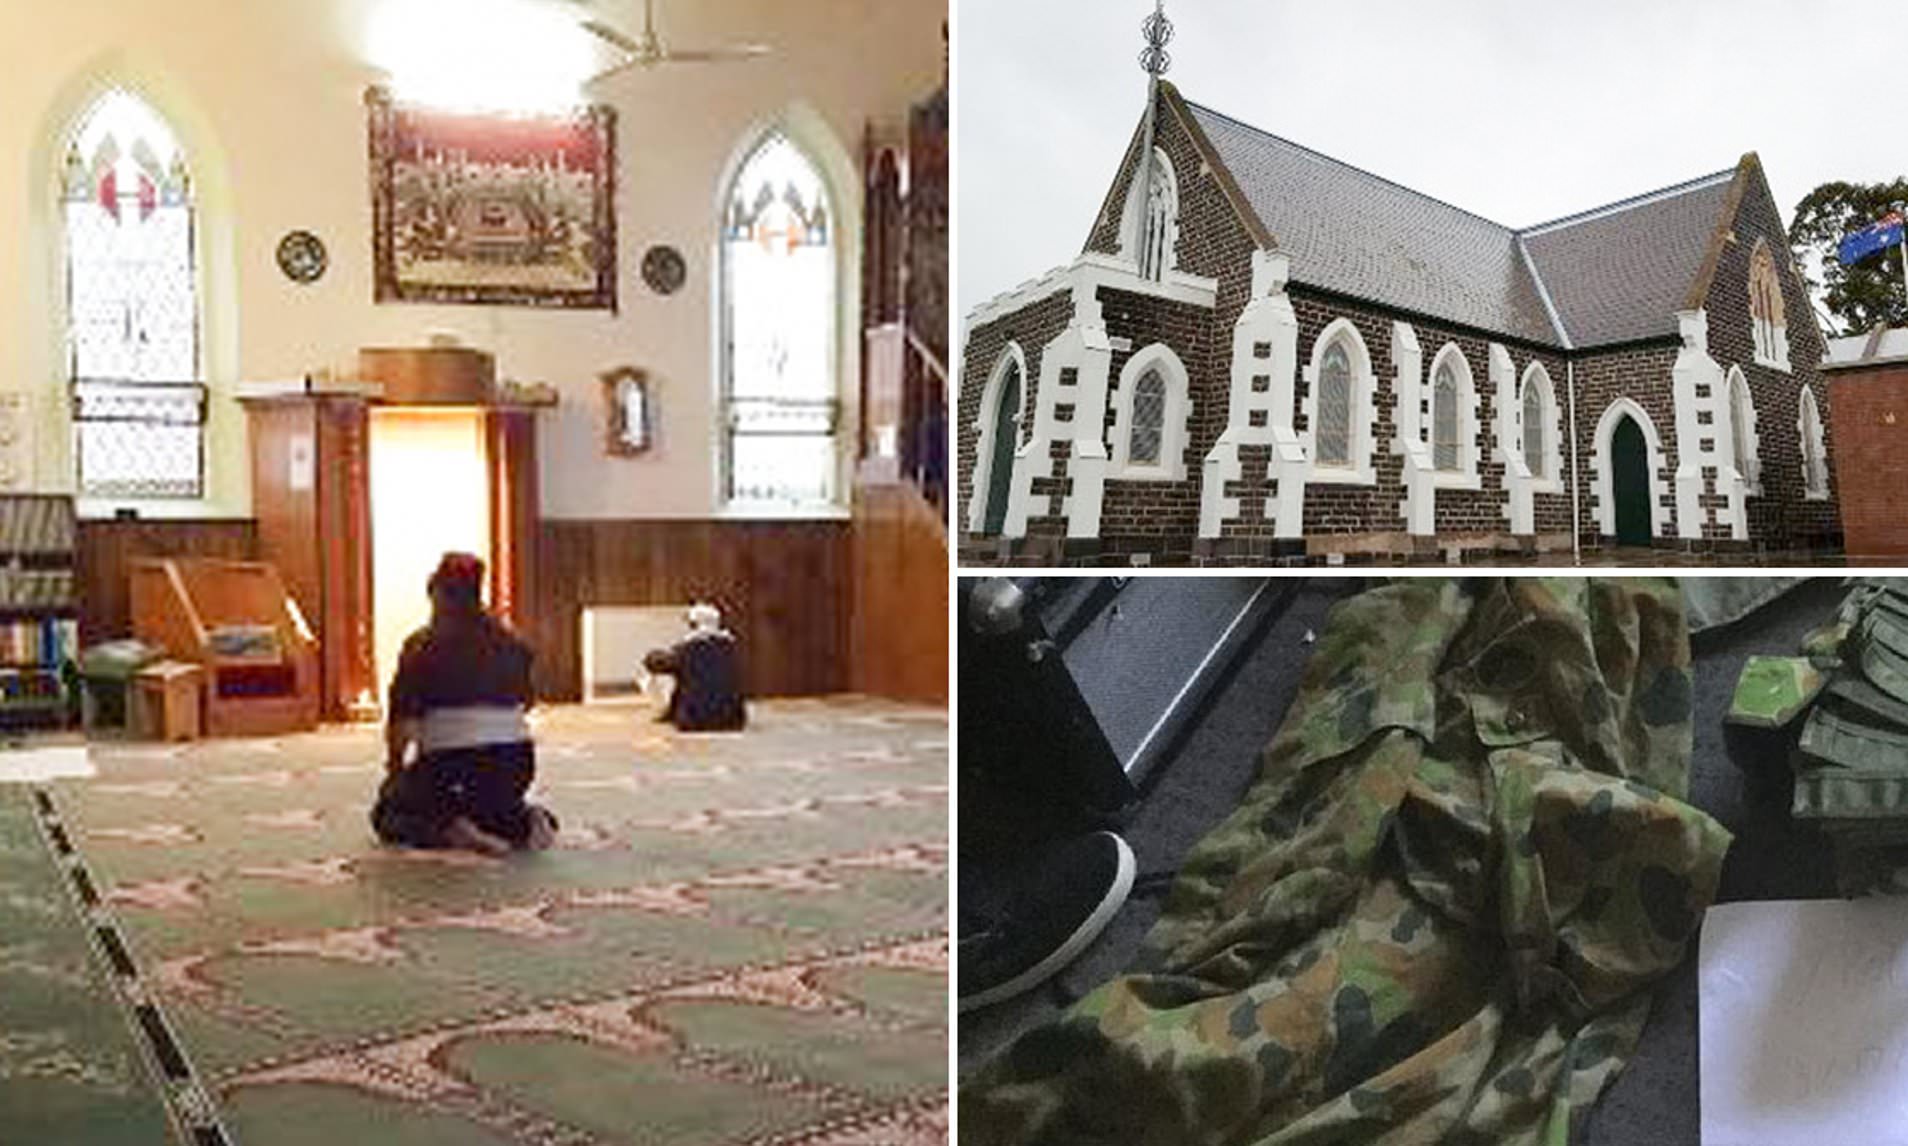 'Copy cat' charged over Vic mosque threat